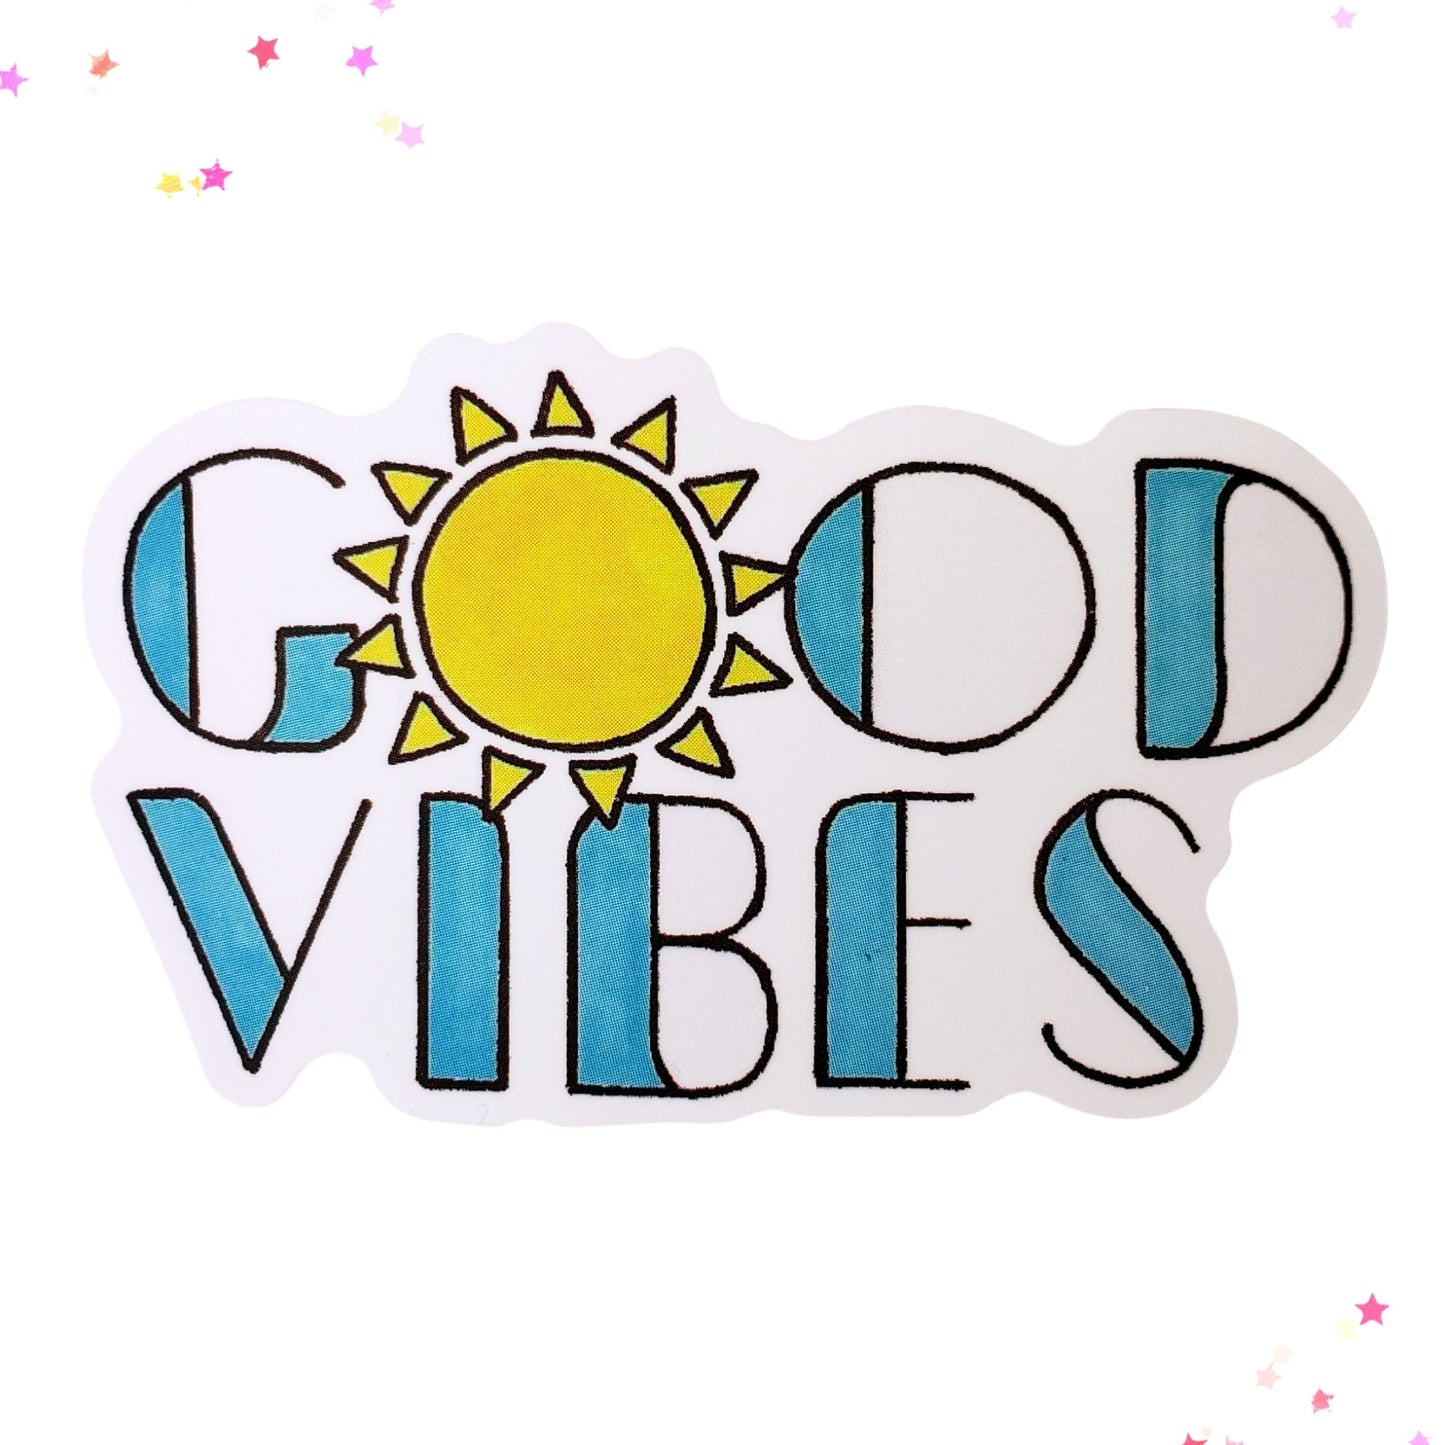 Sunny Good Vibes Waterproof Sticker from Confetti Kitty, Only 1.00